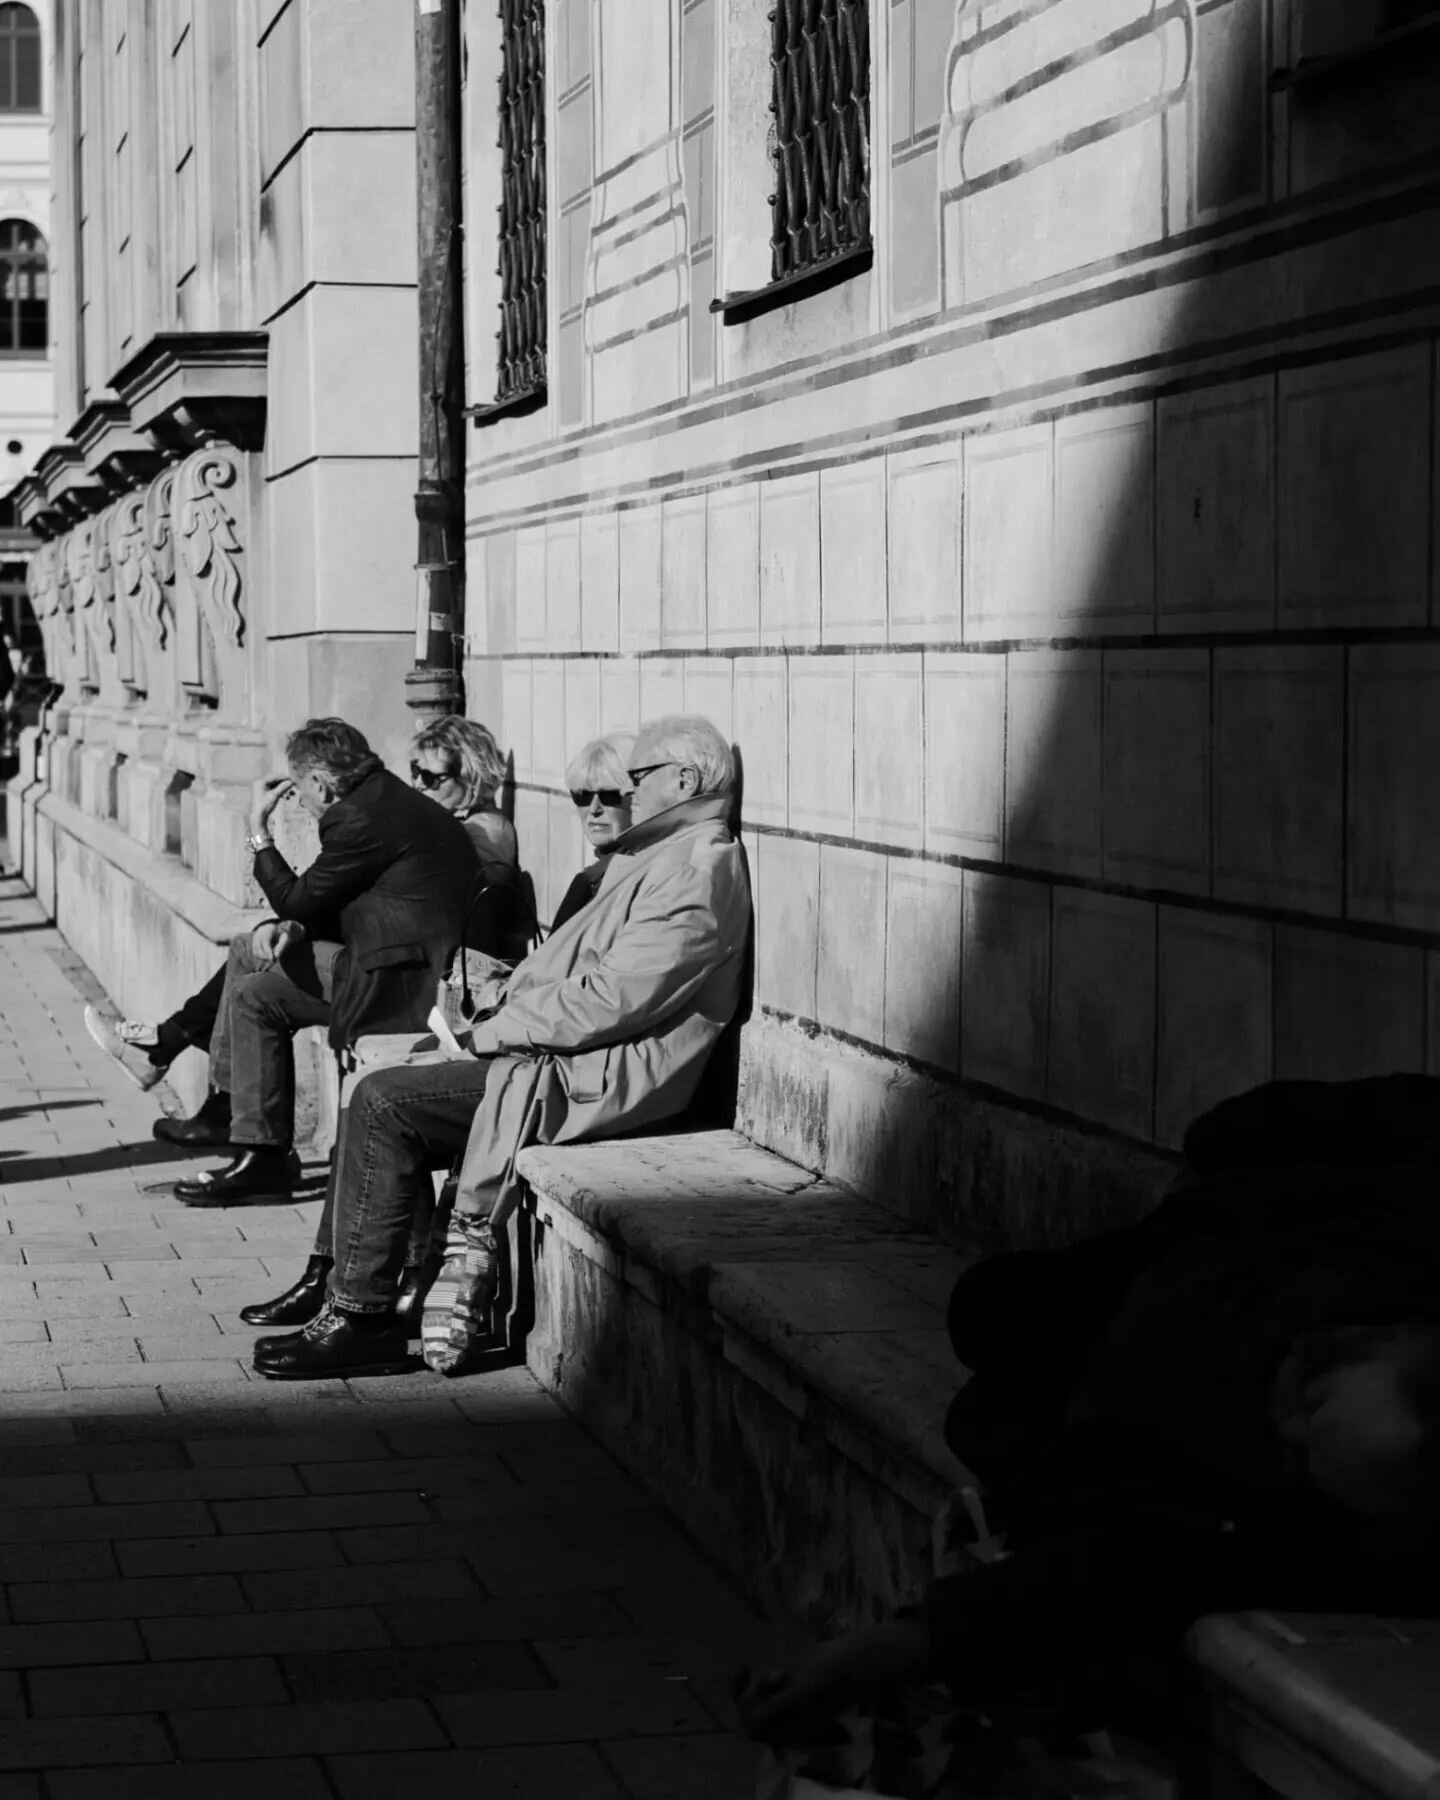 Everybody's resting for another reason and in another way. 

See the detail in the shadow. 🤌🏼

#streetmoments #streetmoment #streetphotographyinternational #streetcollective #streetphotography #soulofstreet #olympusphotography #mft #munich #odeonsp